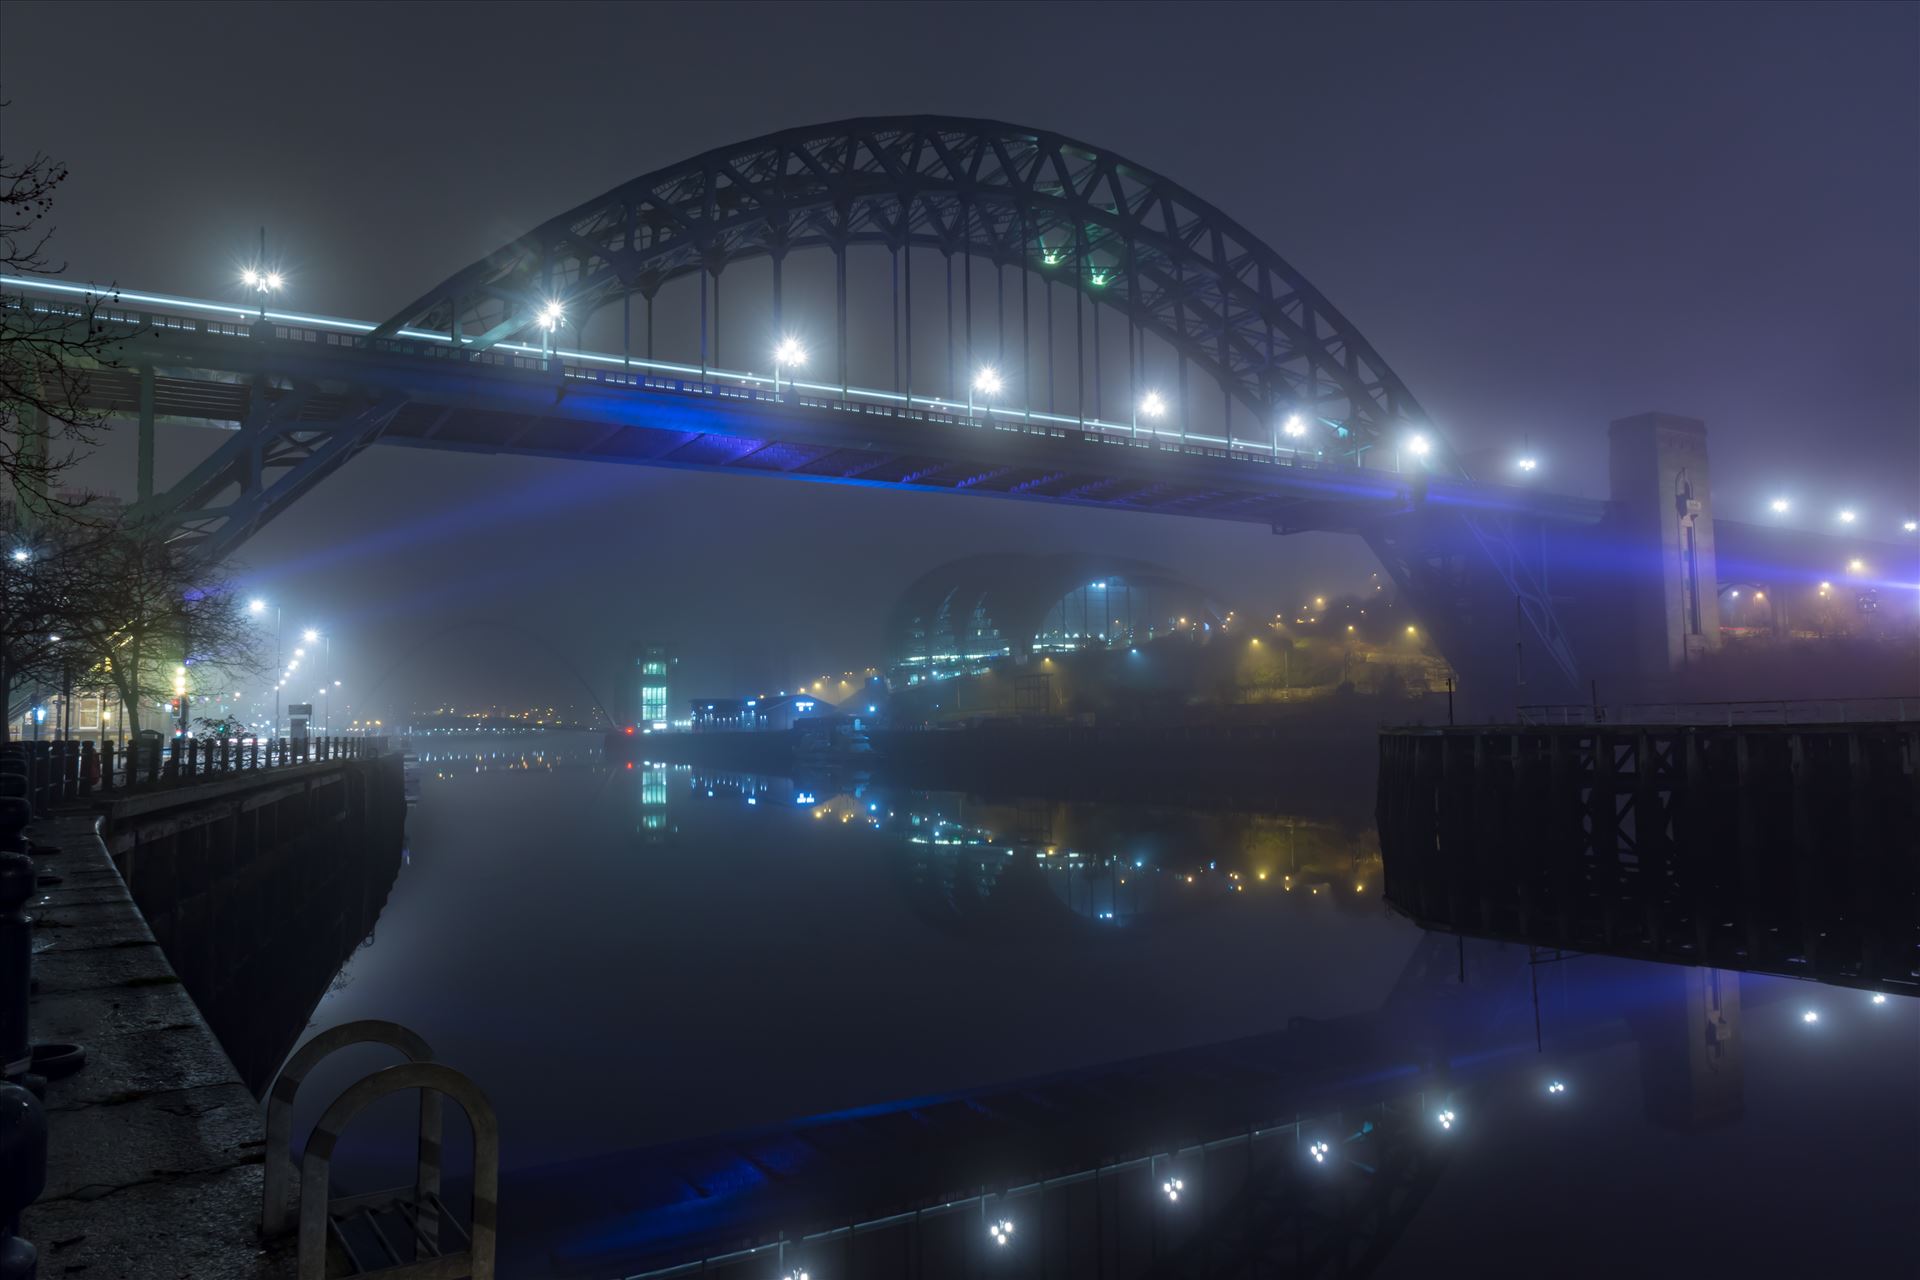 Fog on the Tyne 2 Shot on the quayside at Newcastle early one foggy morning by philreay